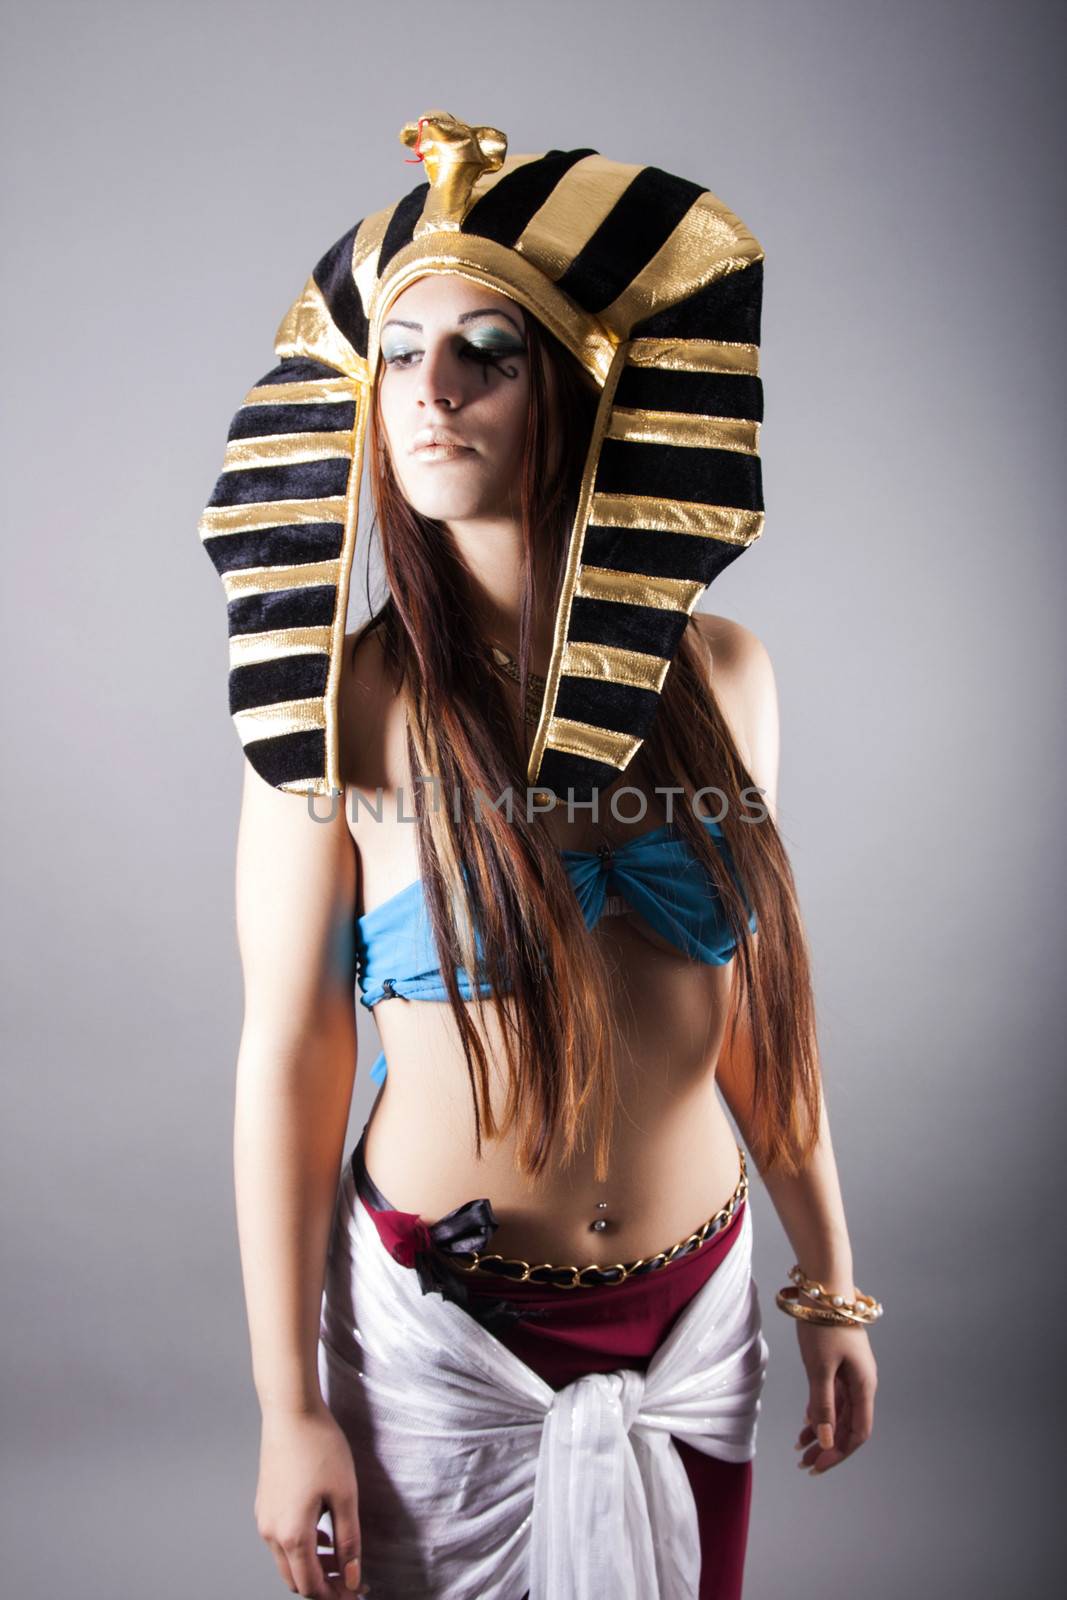 Cleopatra. The queen of egypt. by dukibu